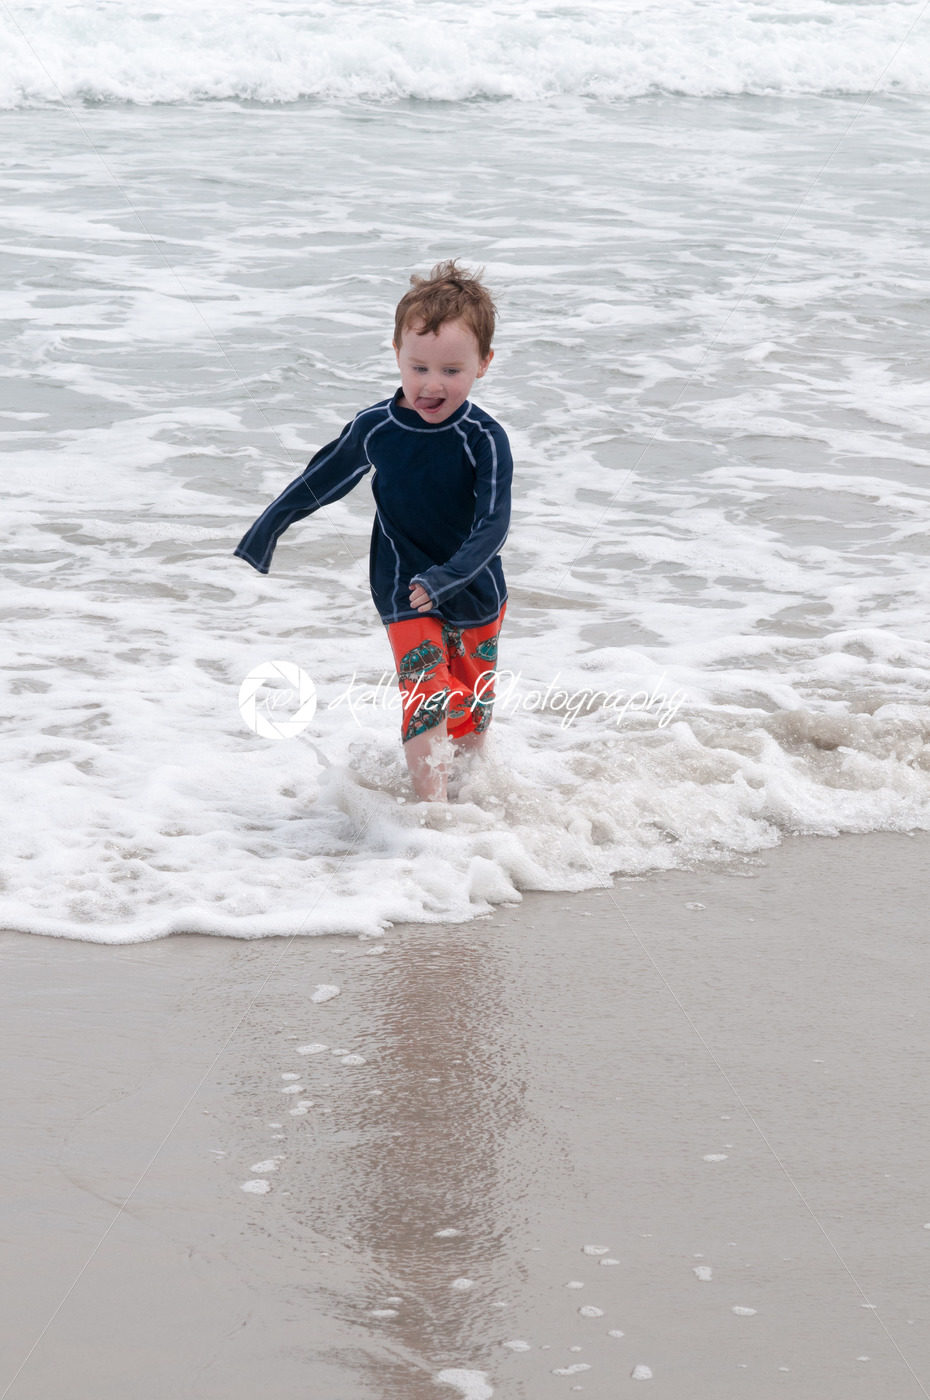 Young cute little boy playing at the seaside running into the surf on a sandy beach in summer sunshine - Kelleher Photography Store